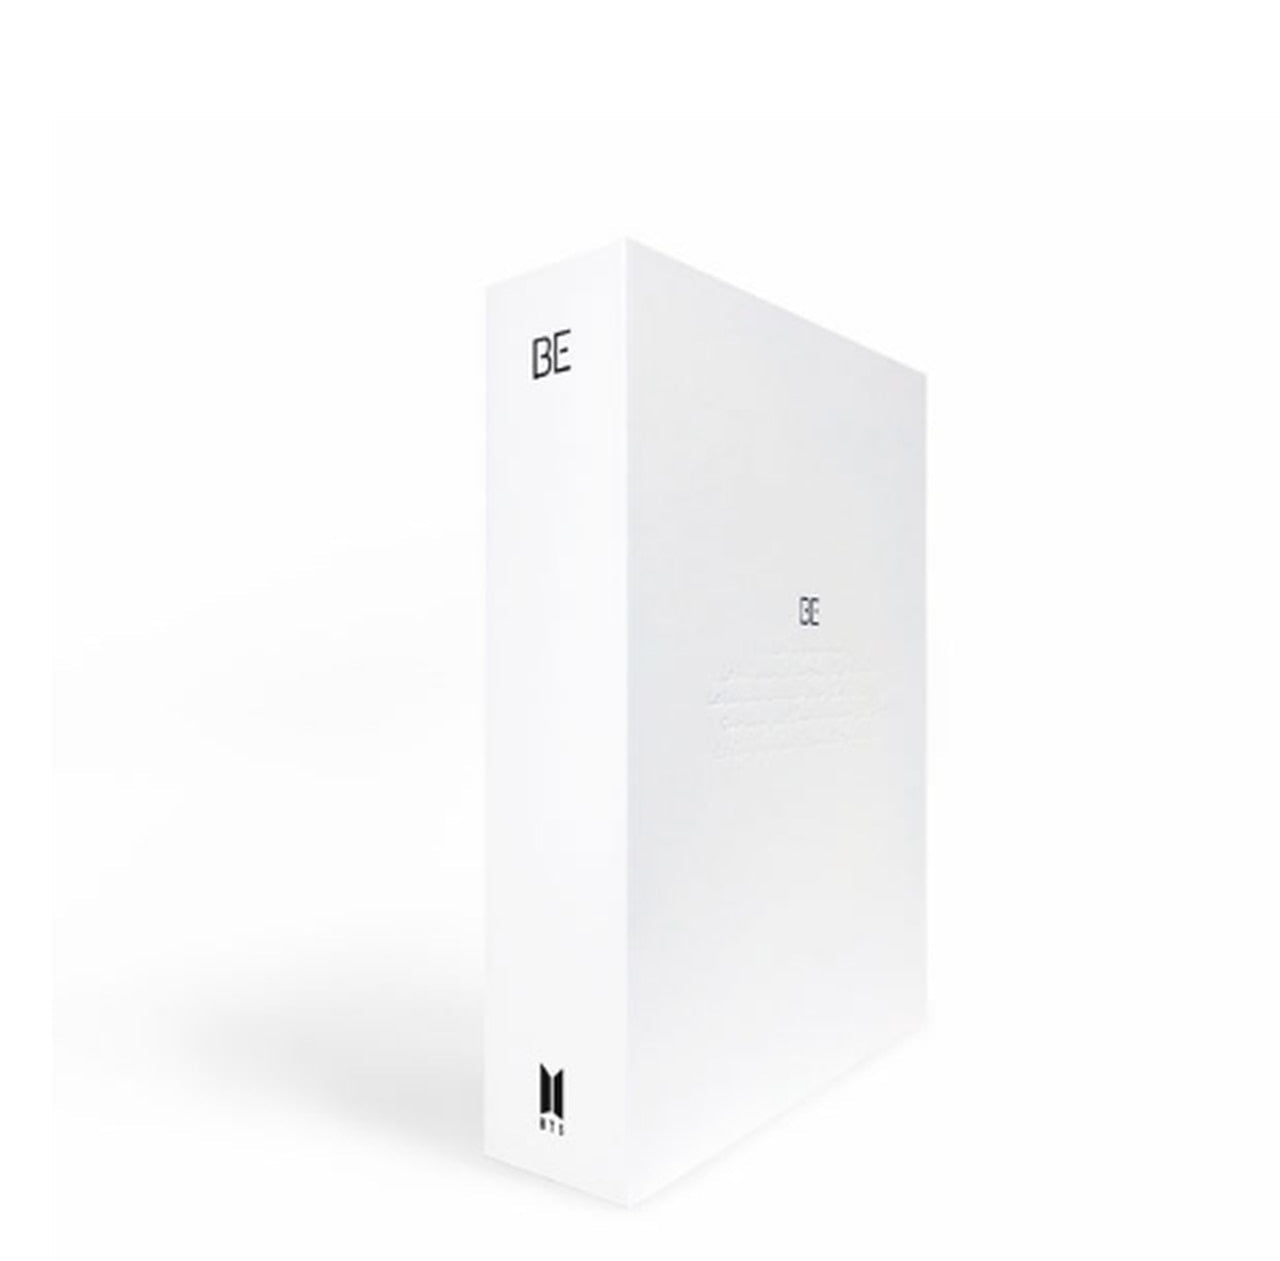 (One) BTS - BE Deluxe edition 